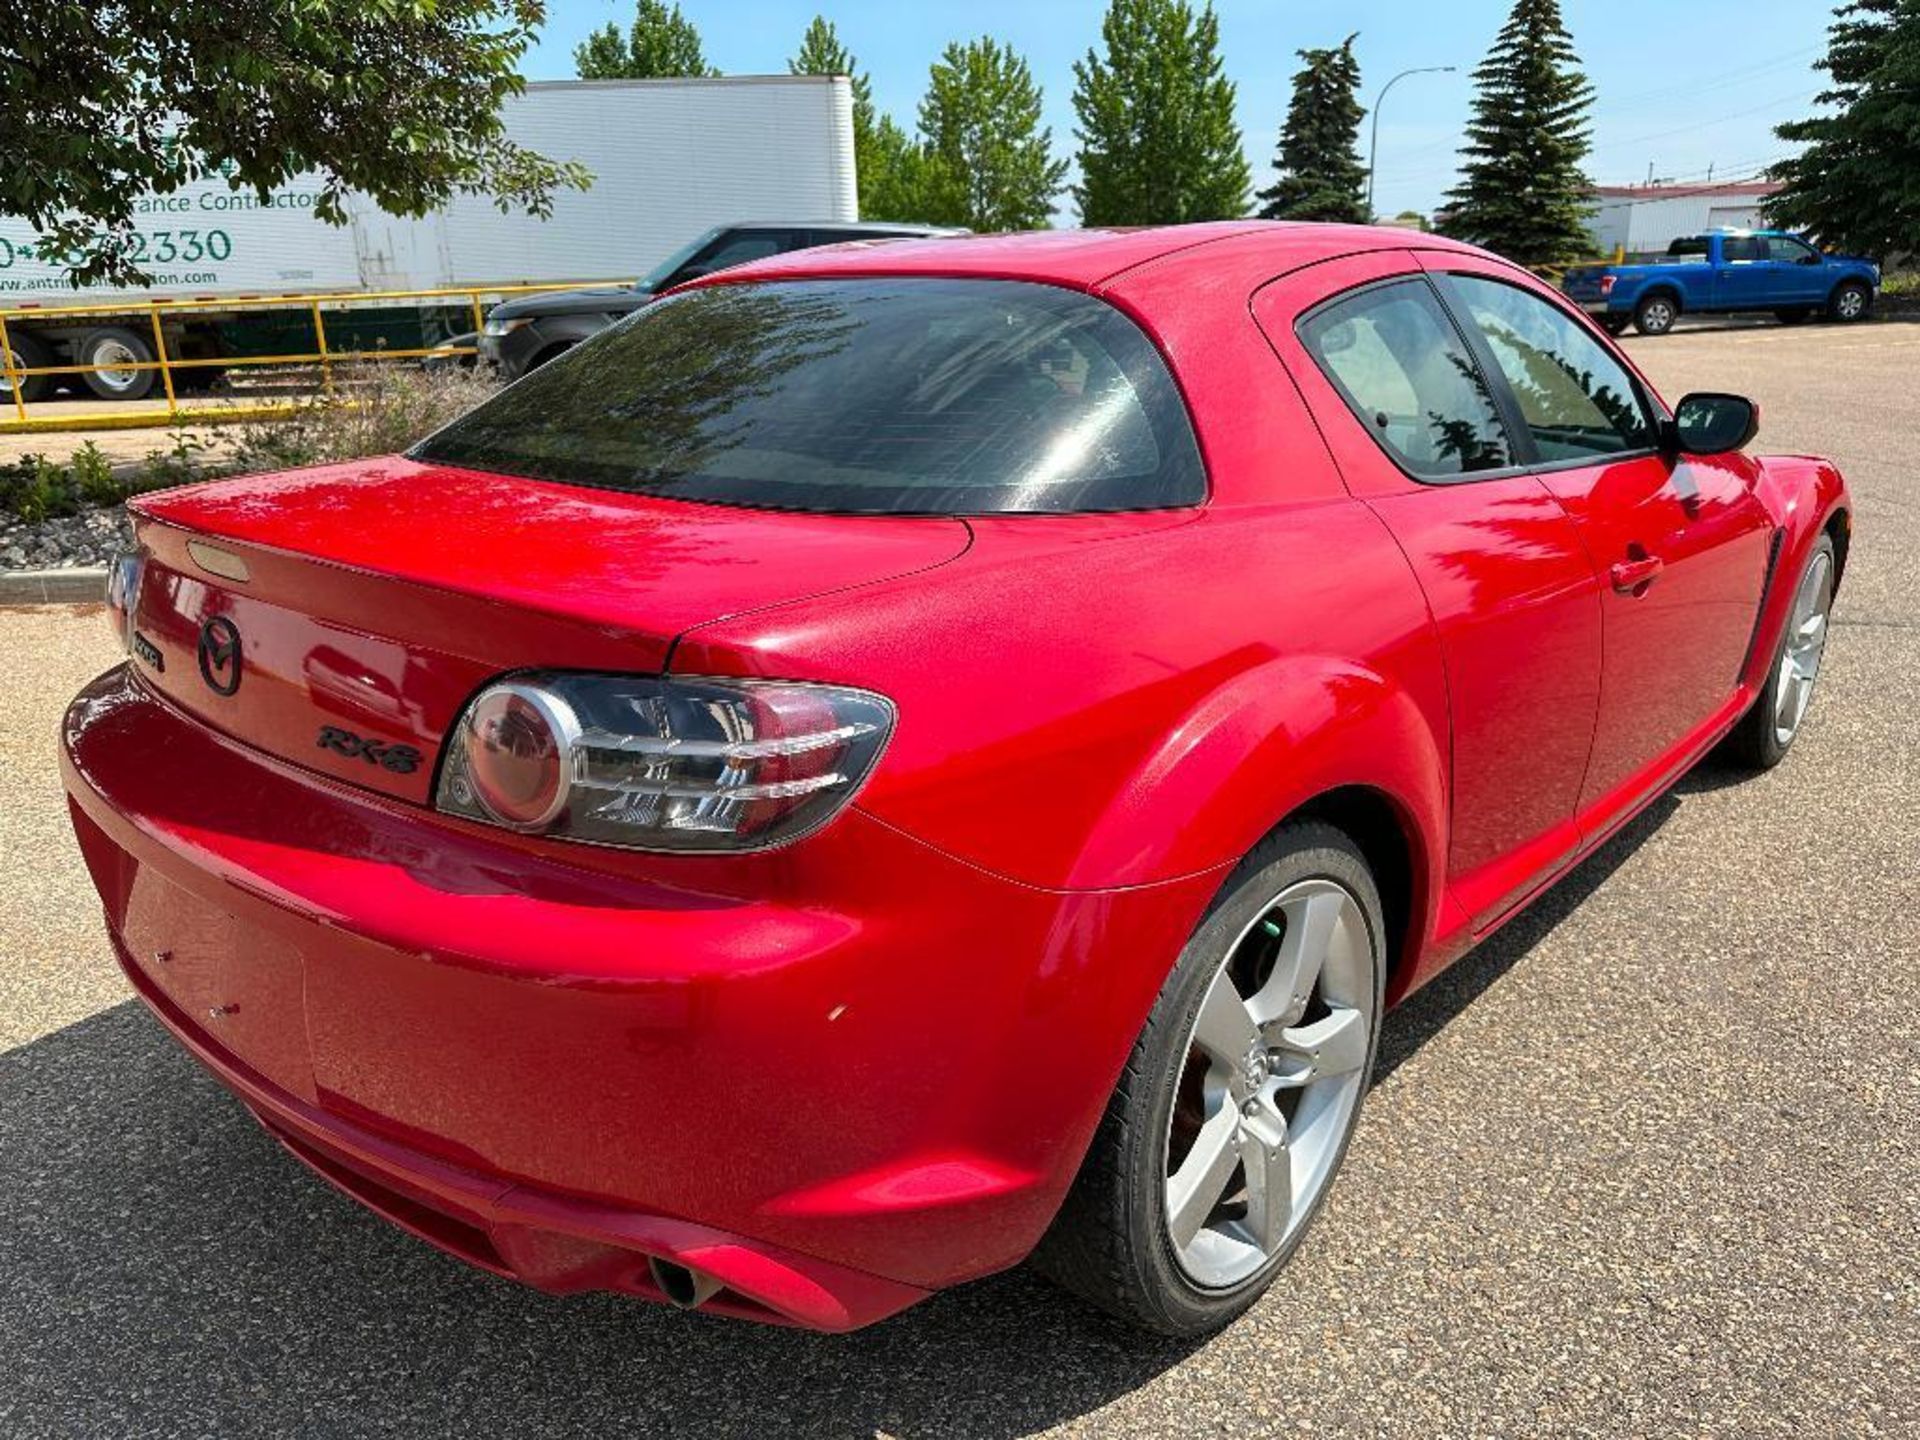 2005 Mazda RX-8, 125,564 kms, 6-Speed Manual - Image 3 of 18